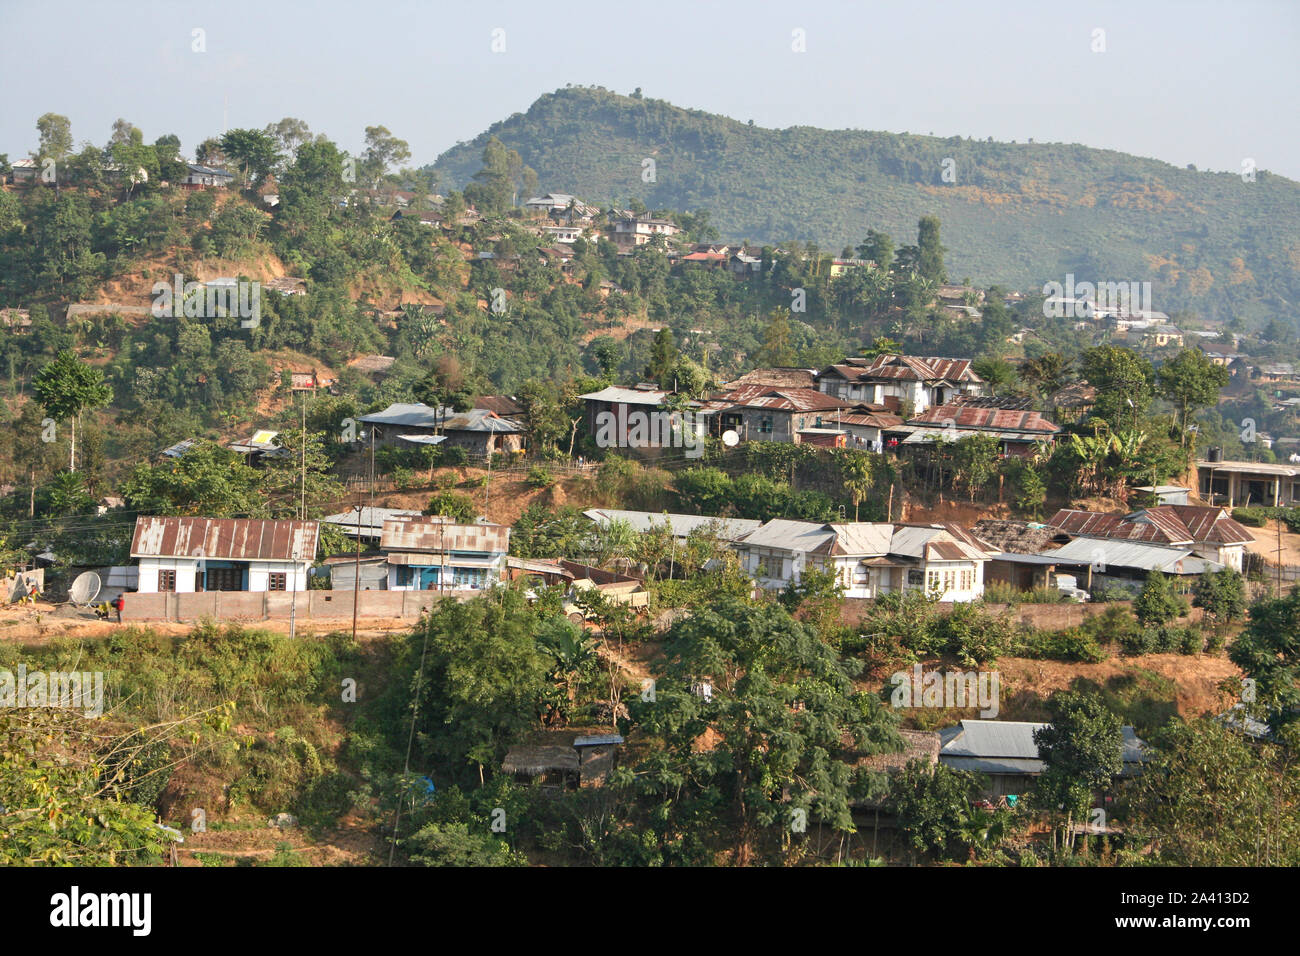 View Of Mon Town On A Forested Hillside In Nagaland, India Stock Photo